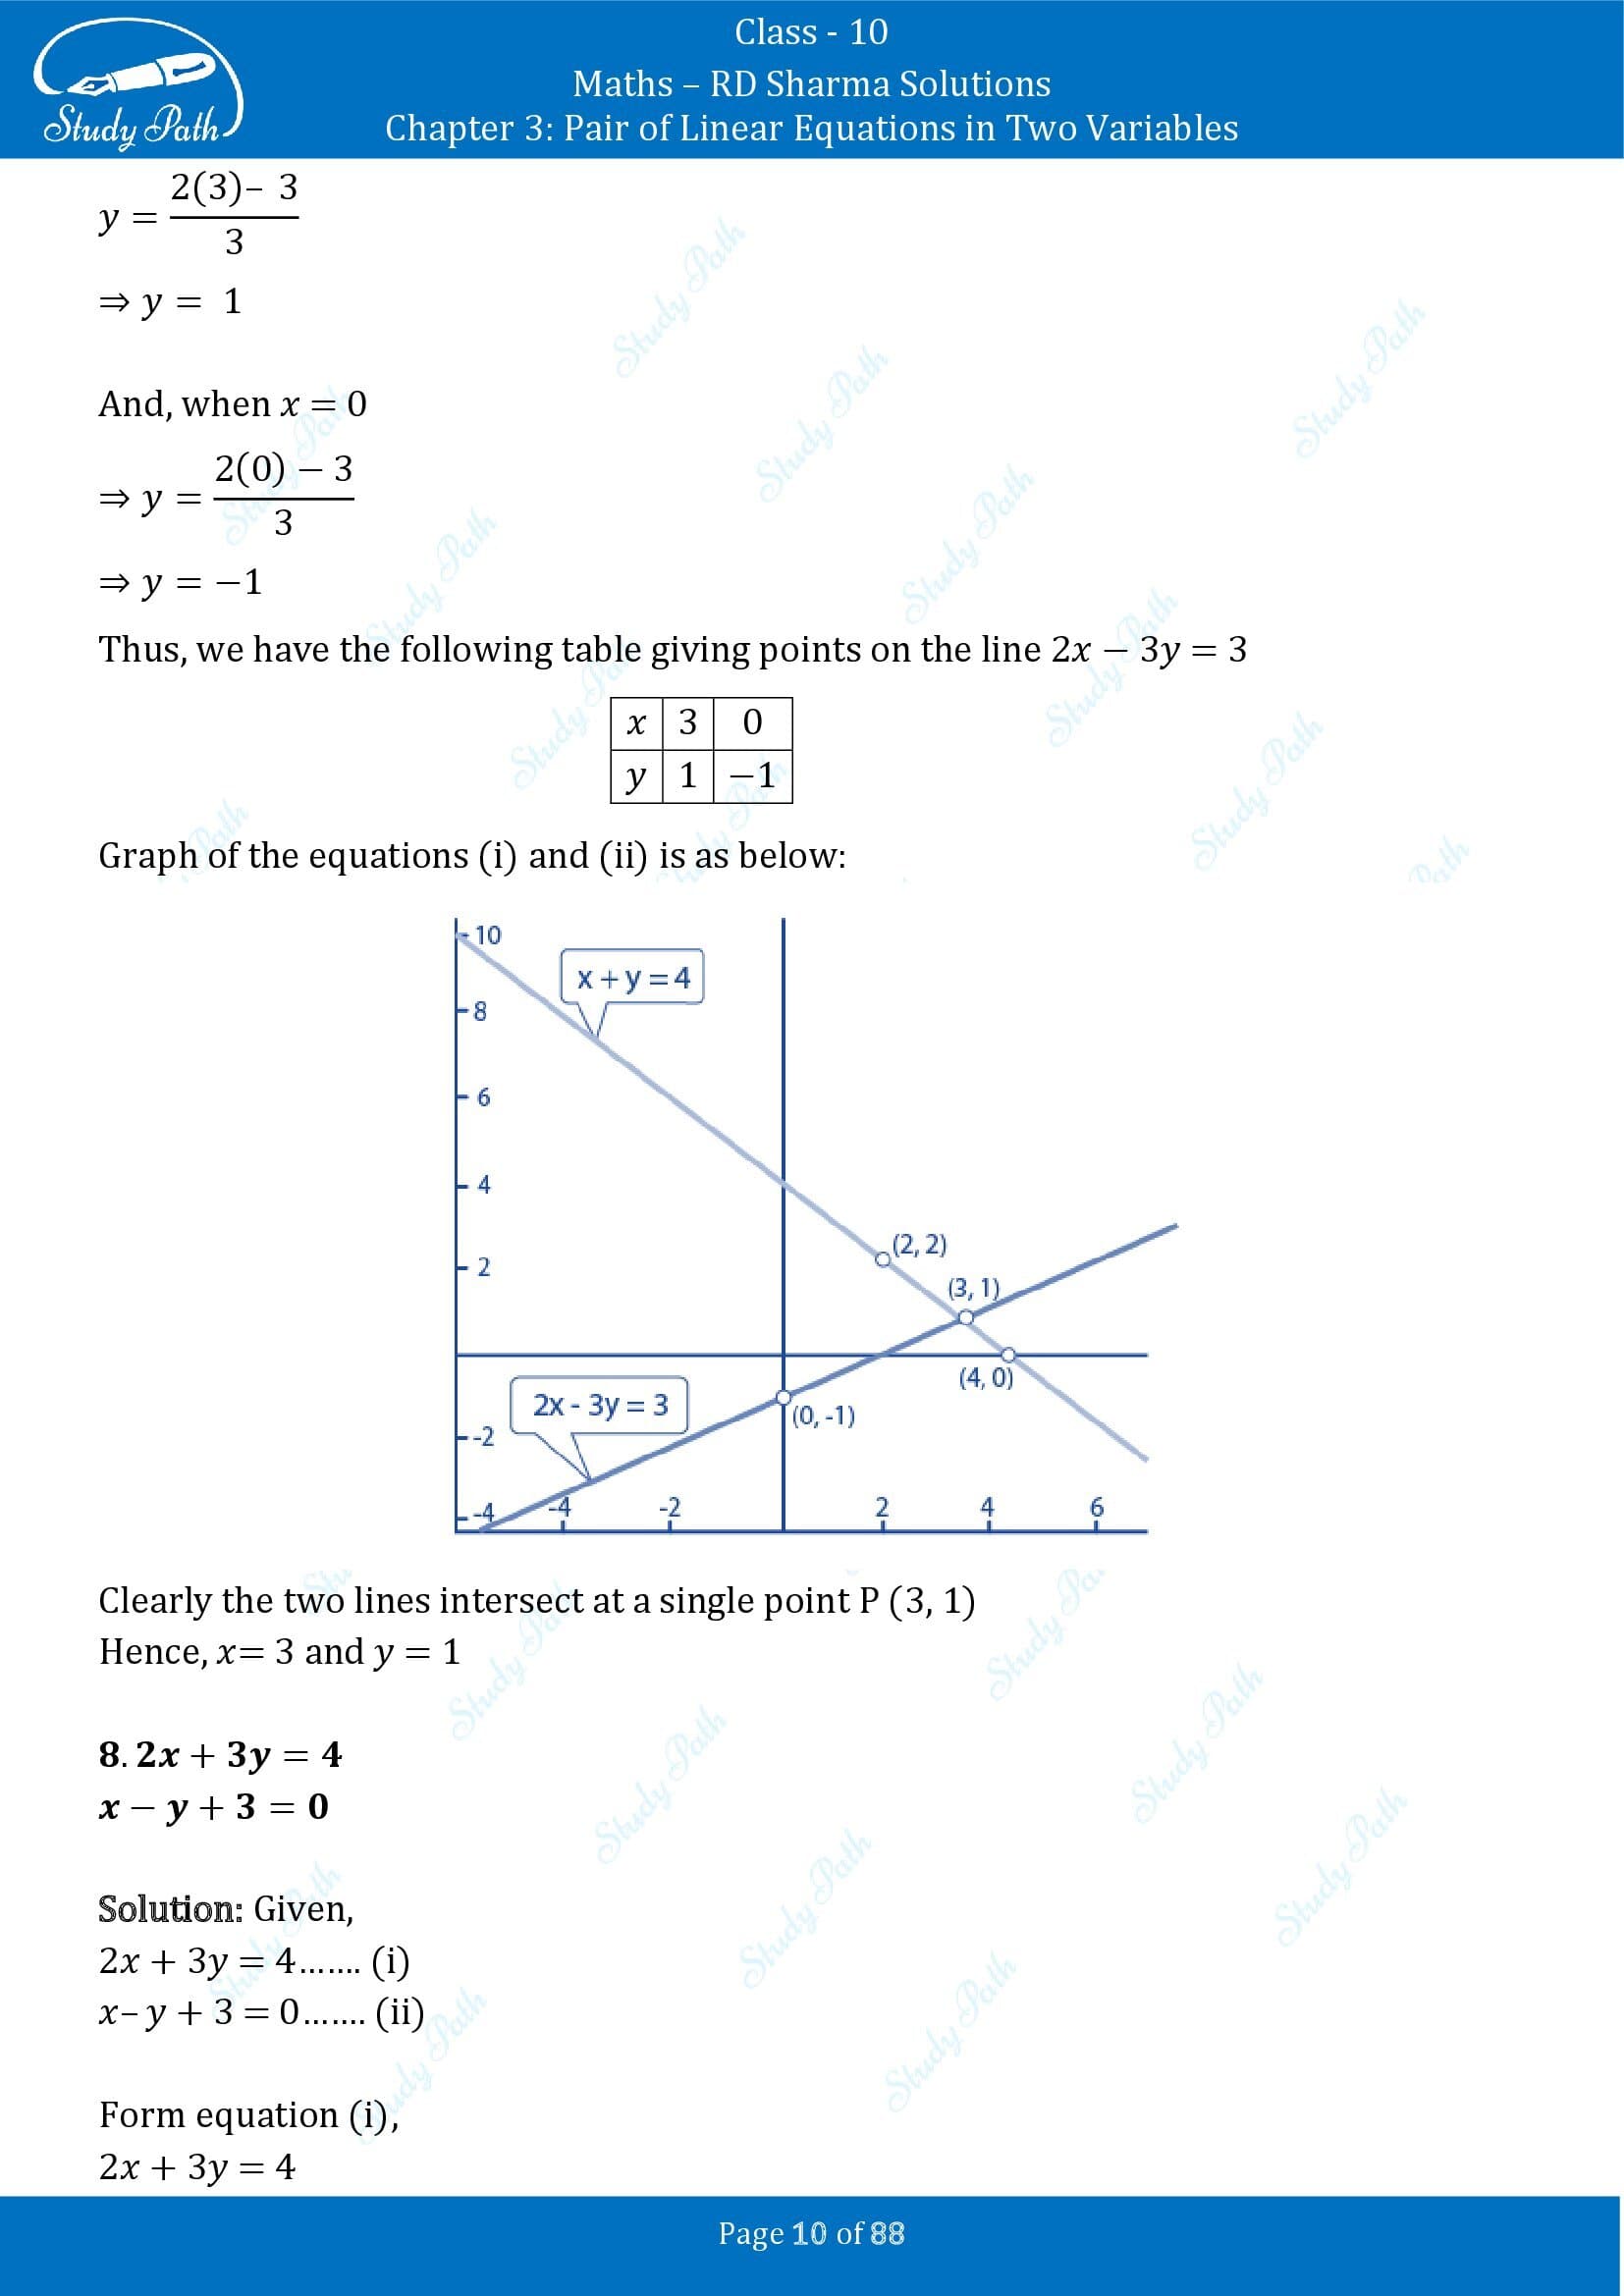 RD Sharma Solutions Class 10 Chapter 3 Pair of Linear Equations in Two Variables Exercise 3.2 00010